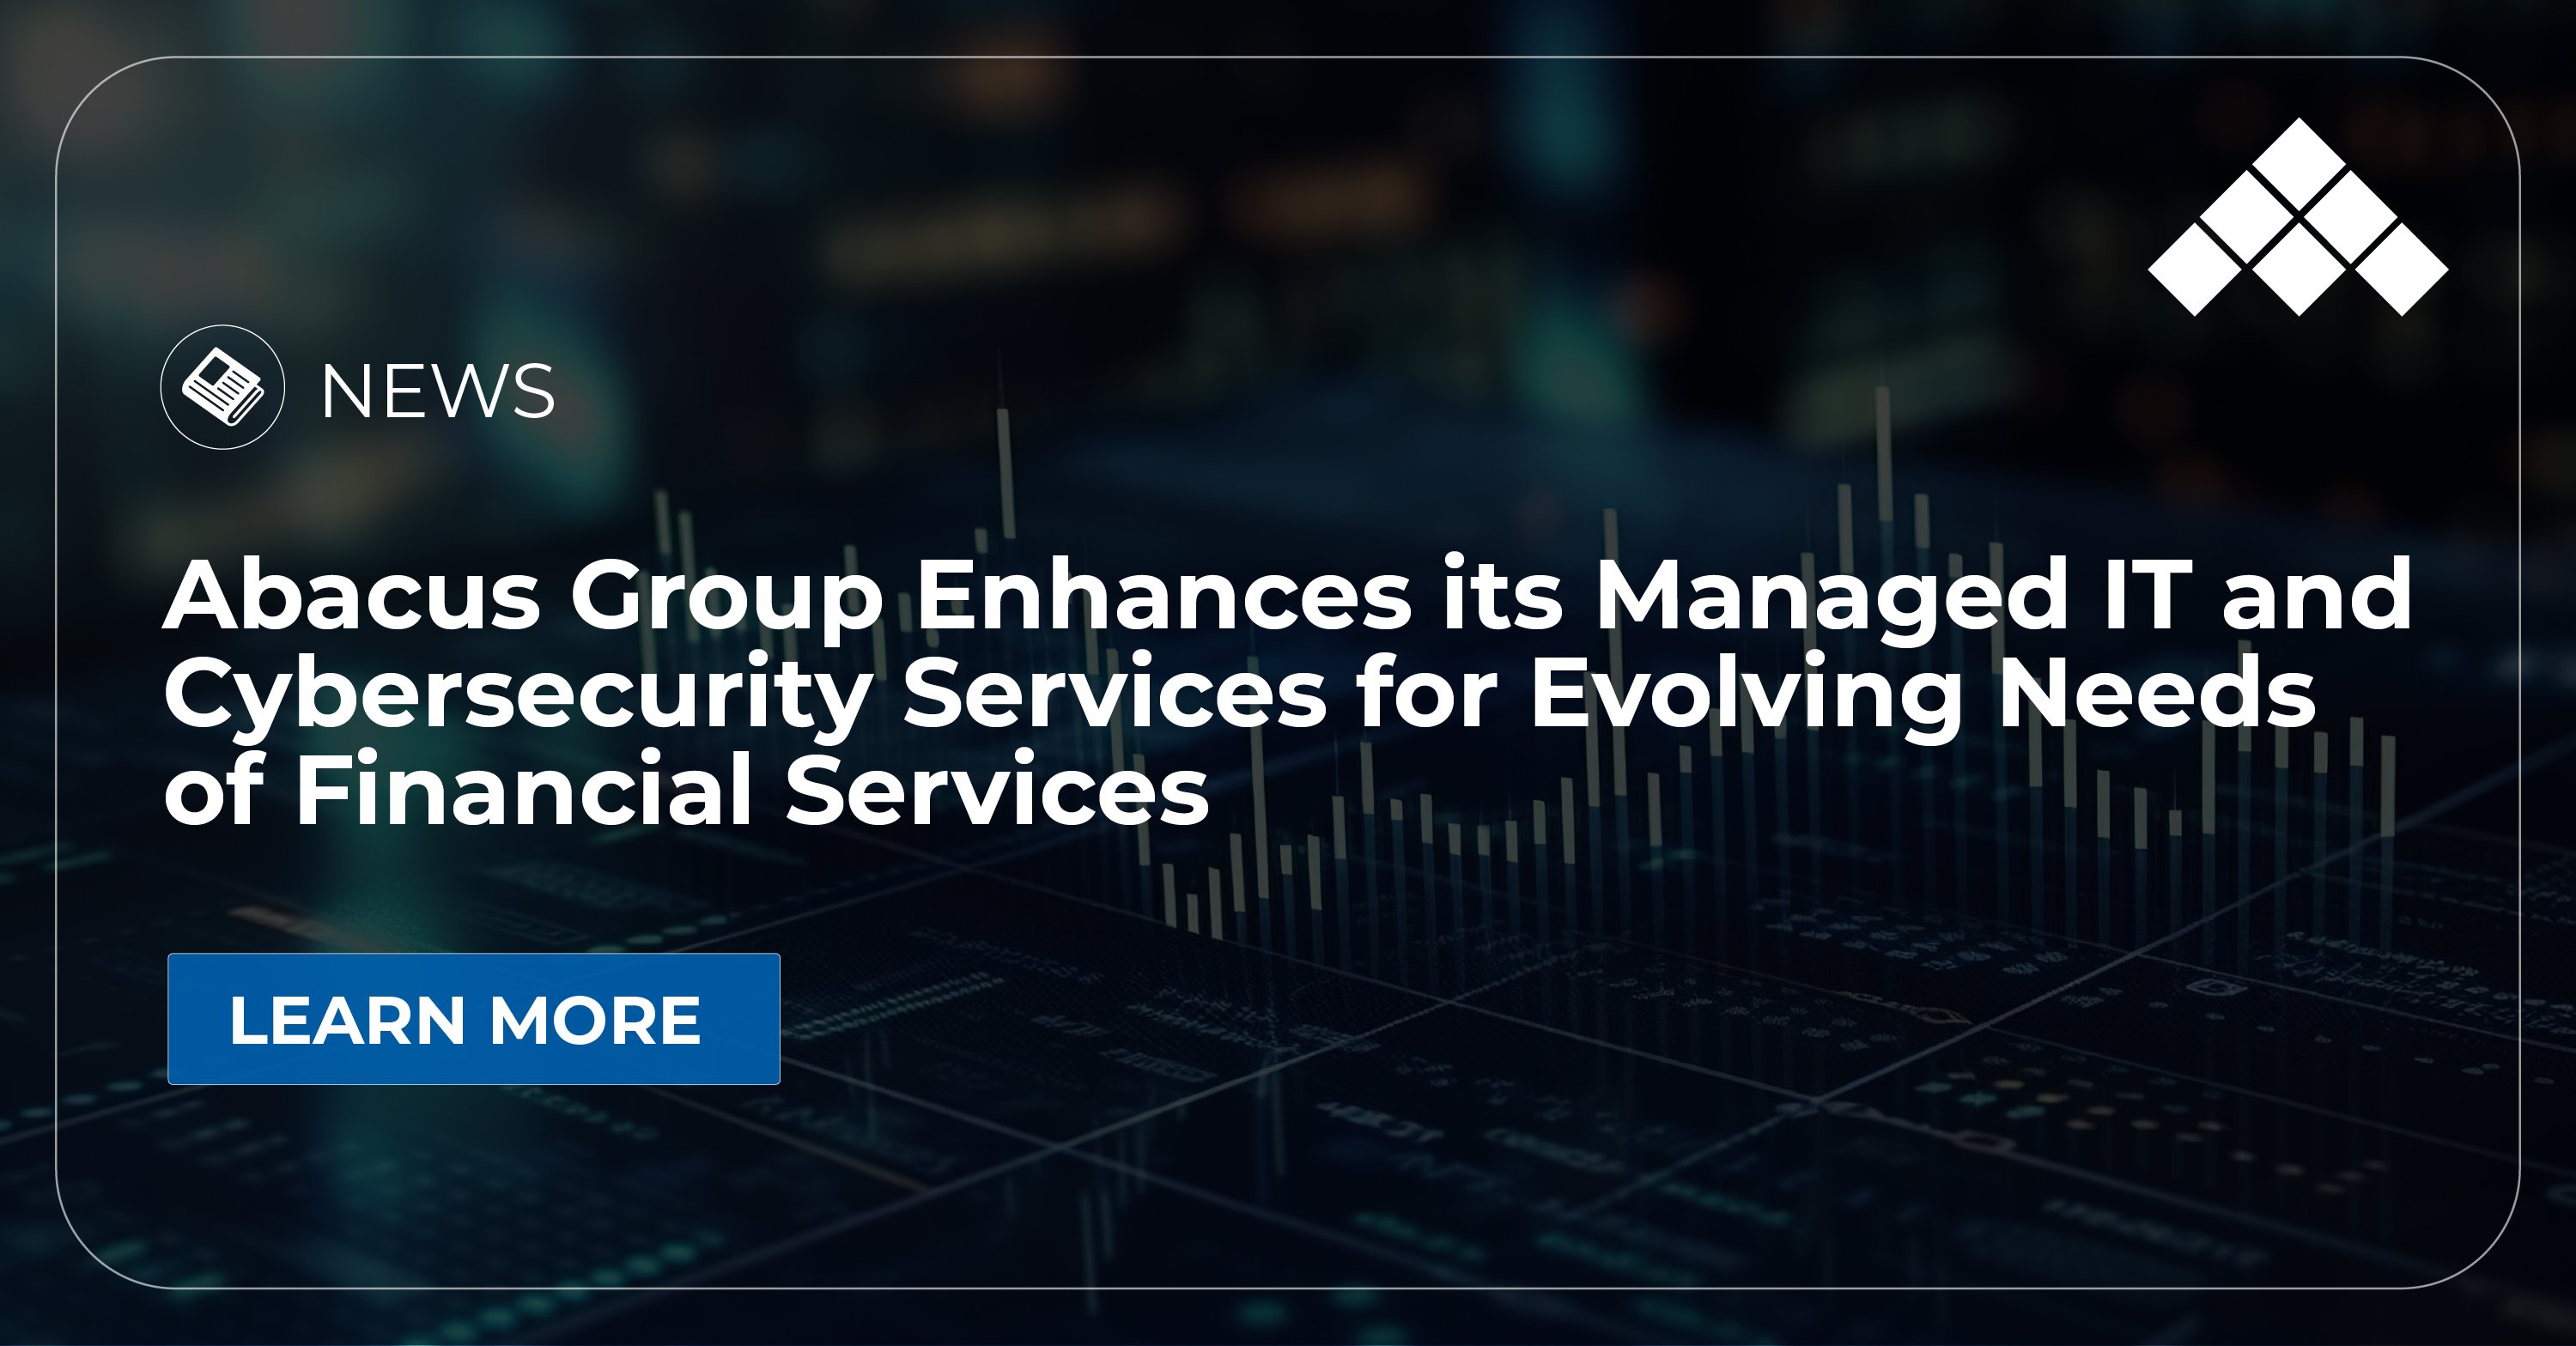 Abacus Group Enhances its Managed IT and Cybersecurity Services for Evolving Needs of Financial Services